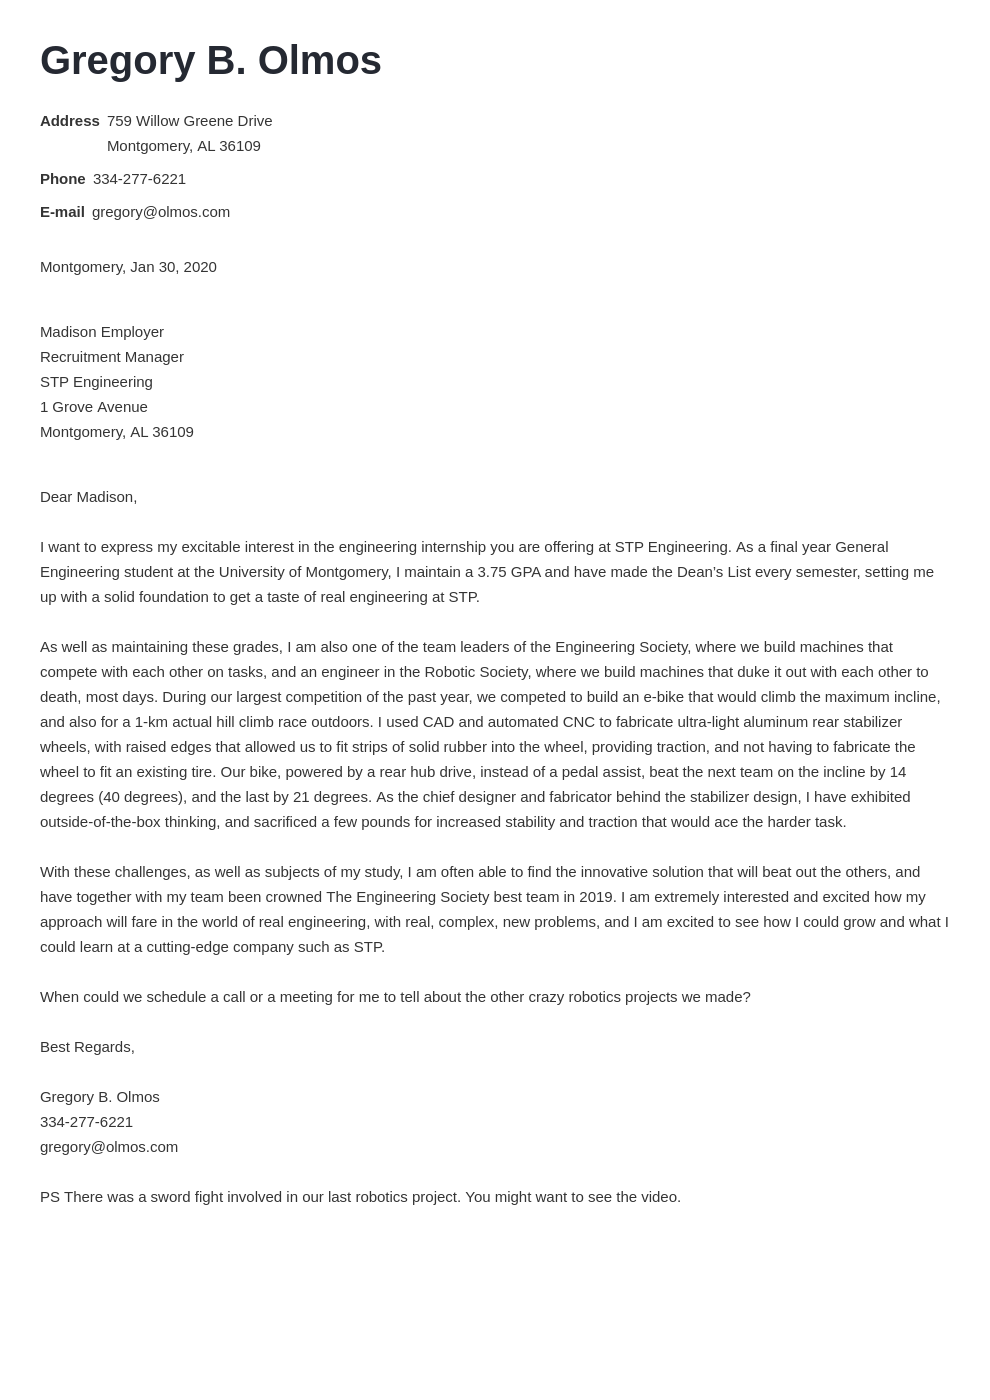 Engineering Internship Cover Letter: Sample & Template to Fill